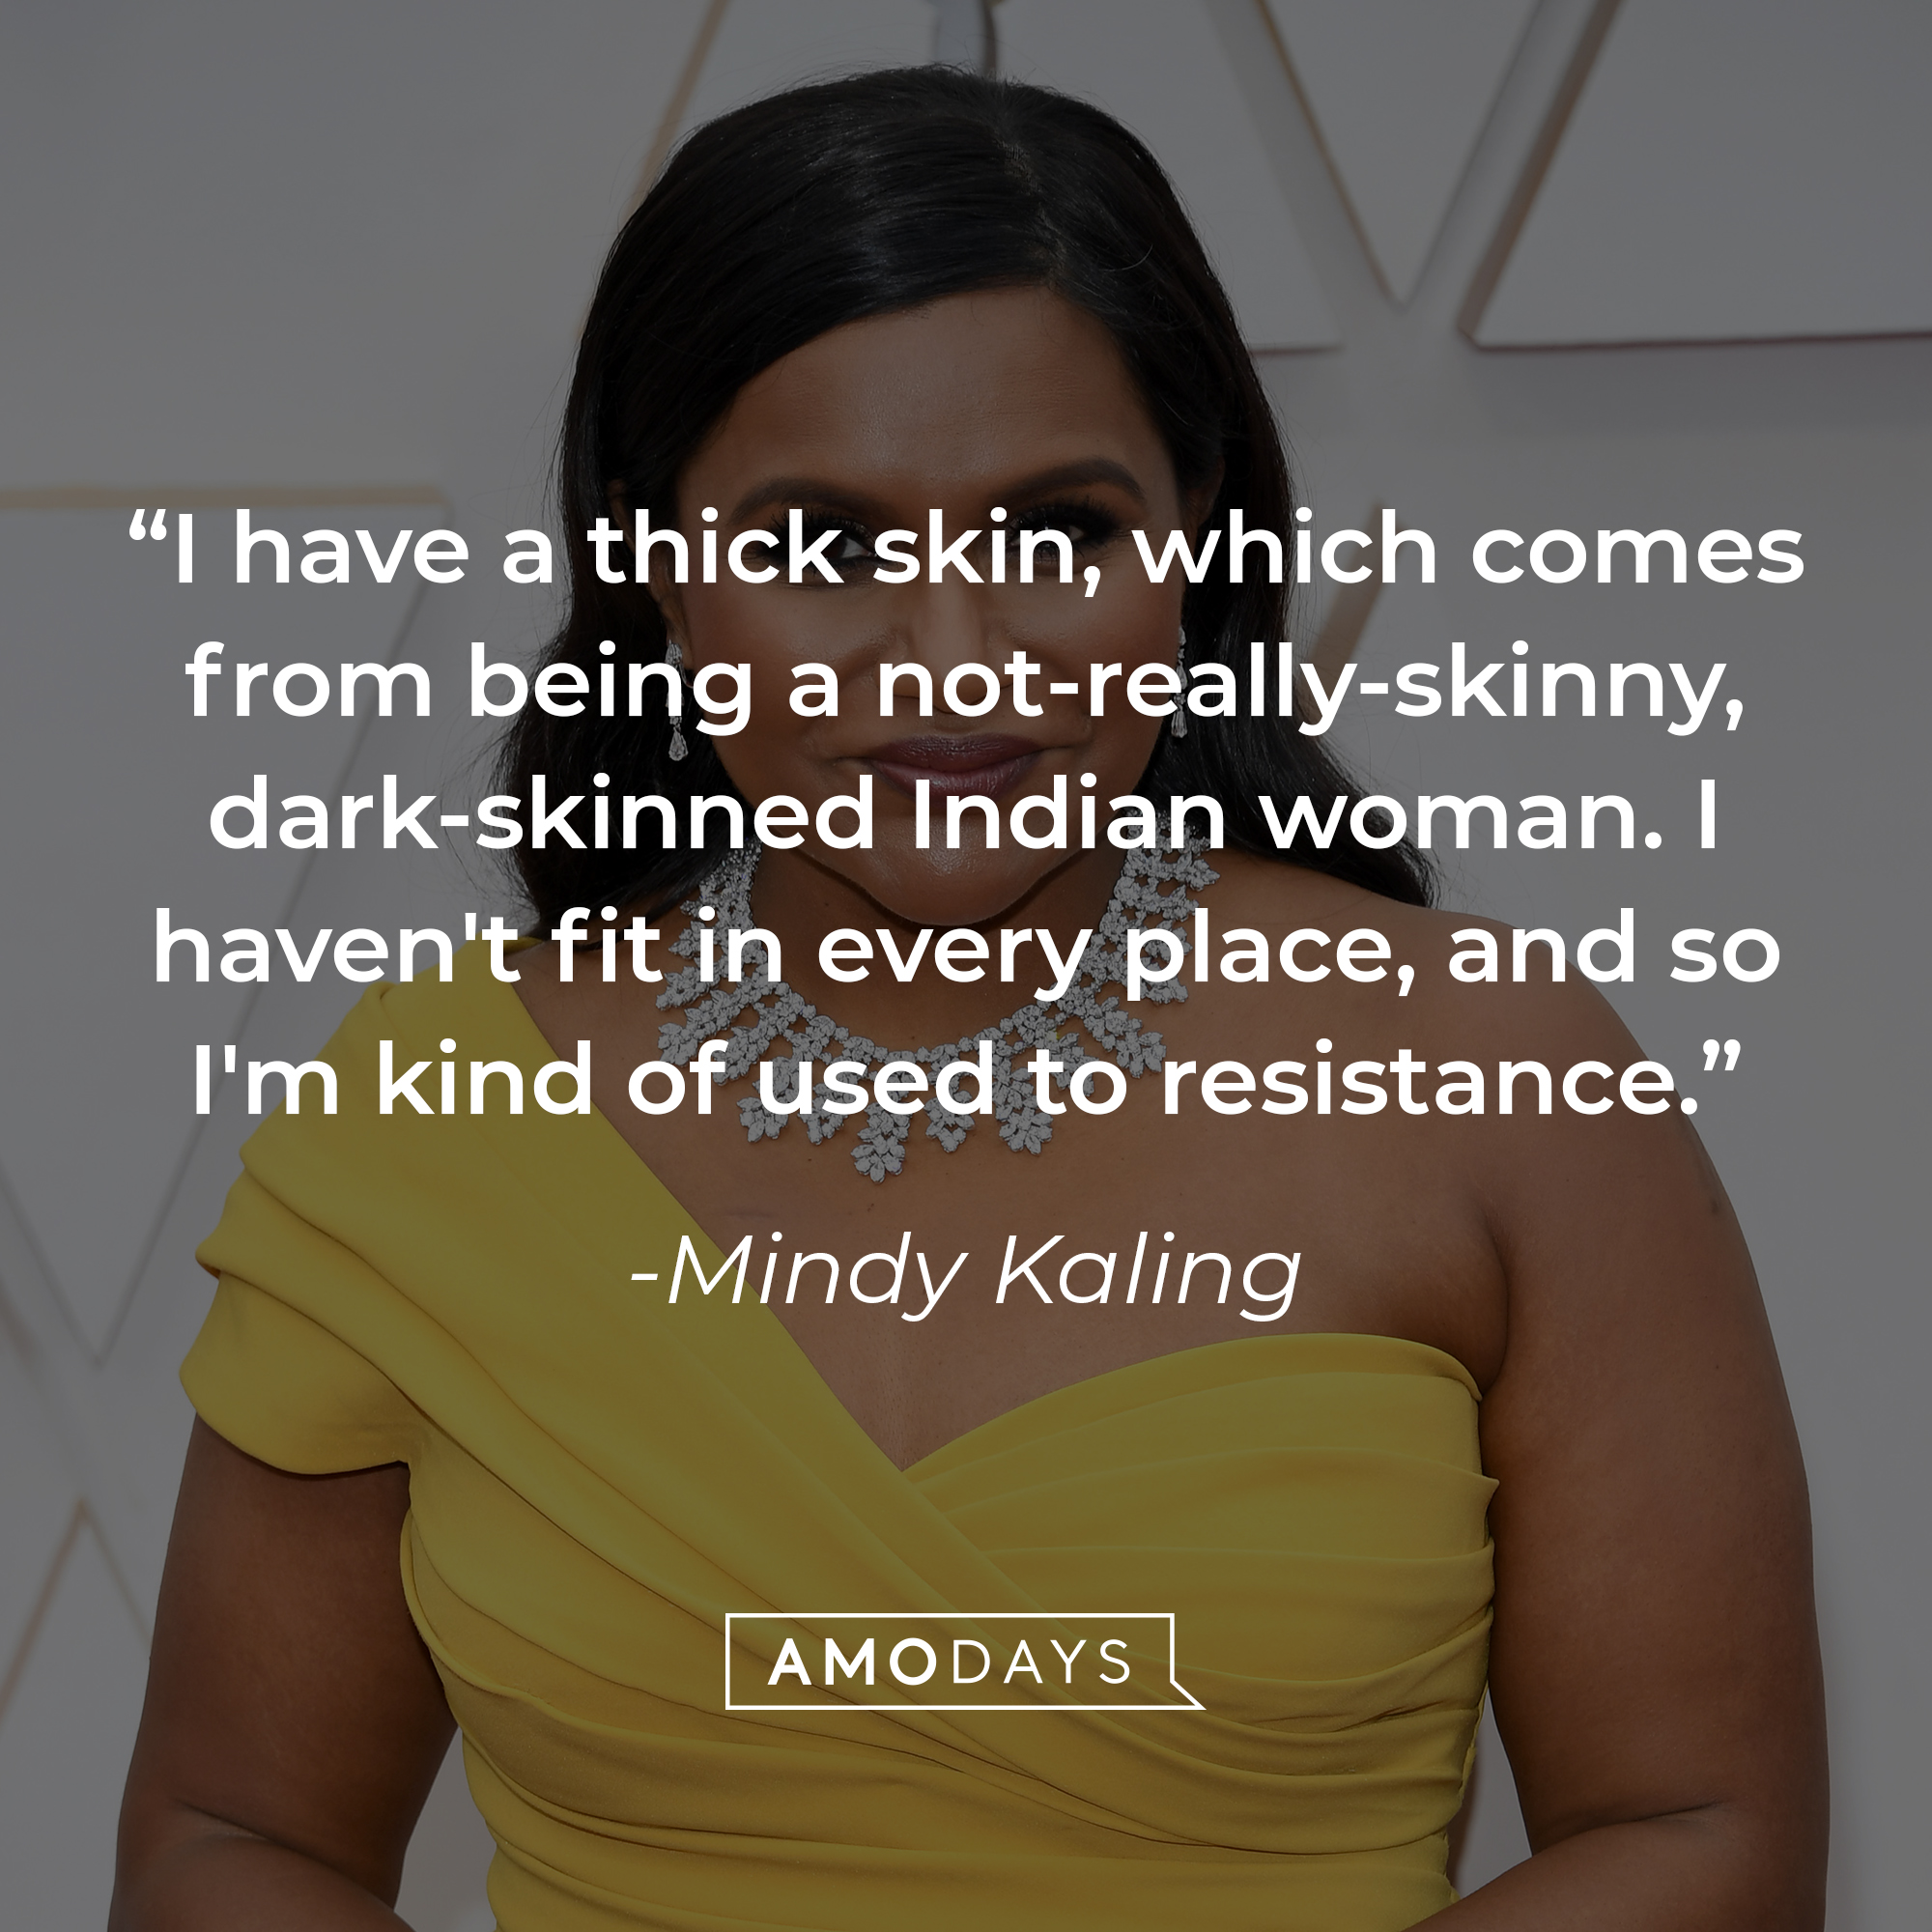 Mindy Kaling's quote: "I have a thick skin, which comes from being a not-really-skinny, dark-skinned Indian woman. I haven't fit in every place, and so I'm kind of used to resistance." | Source: Getty Images